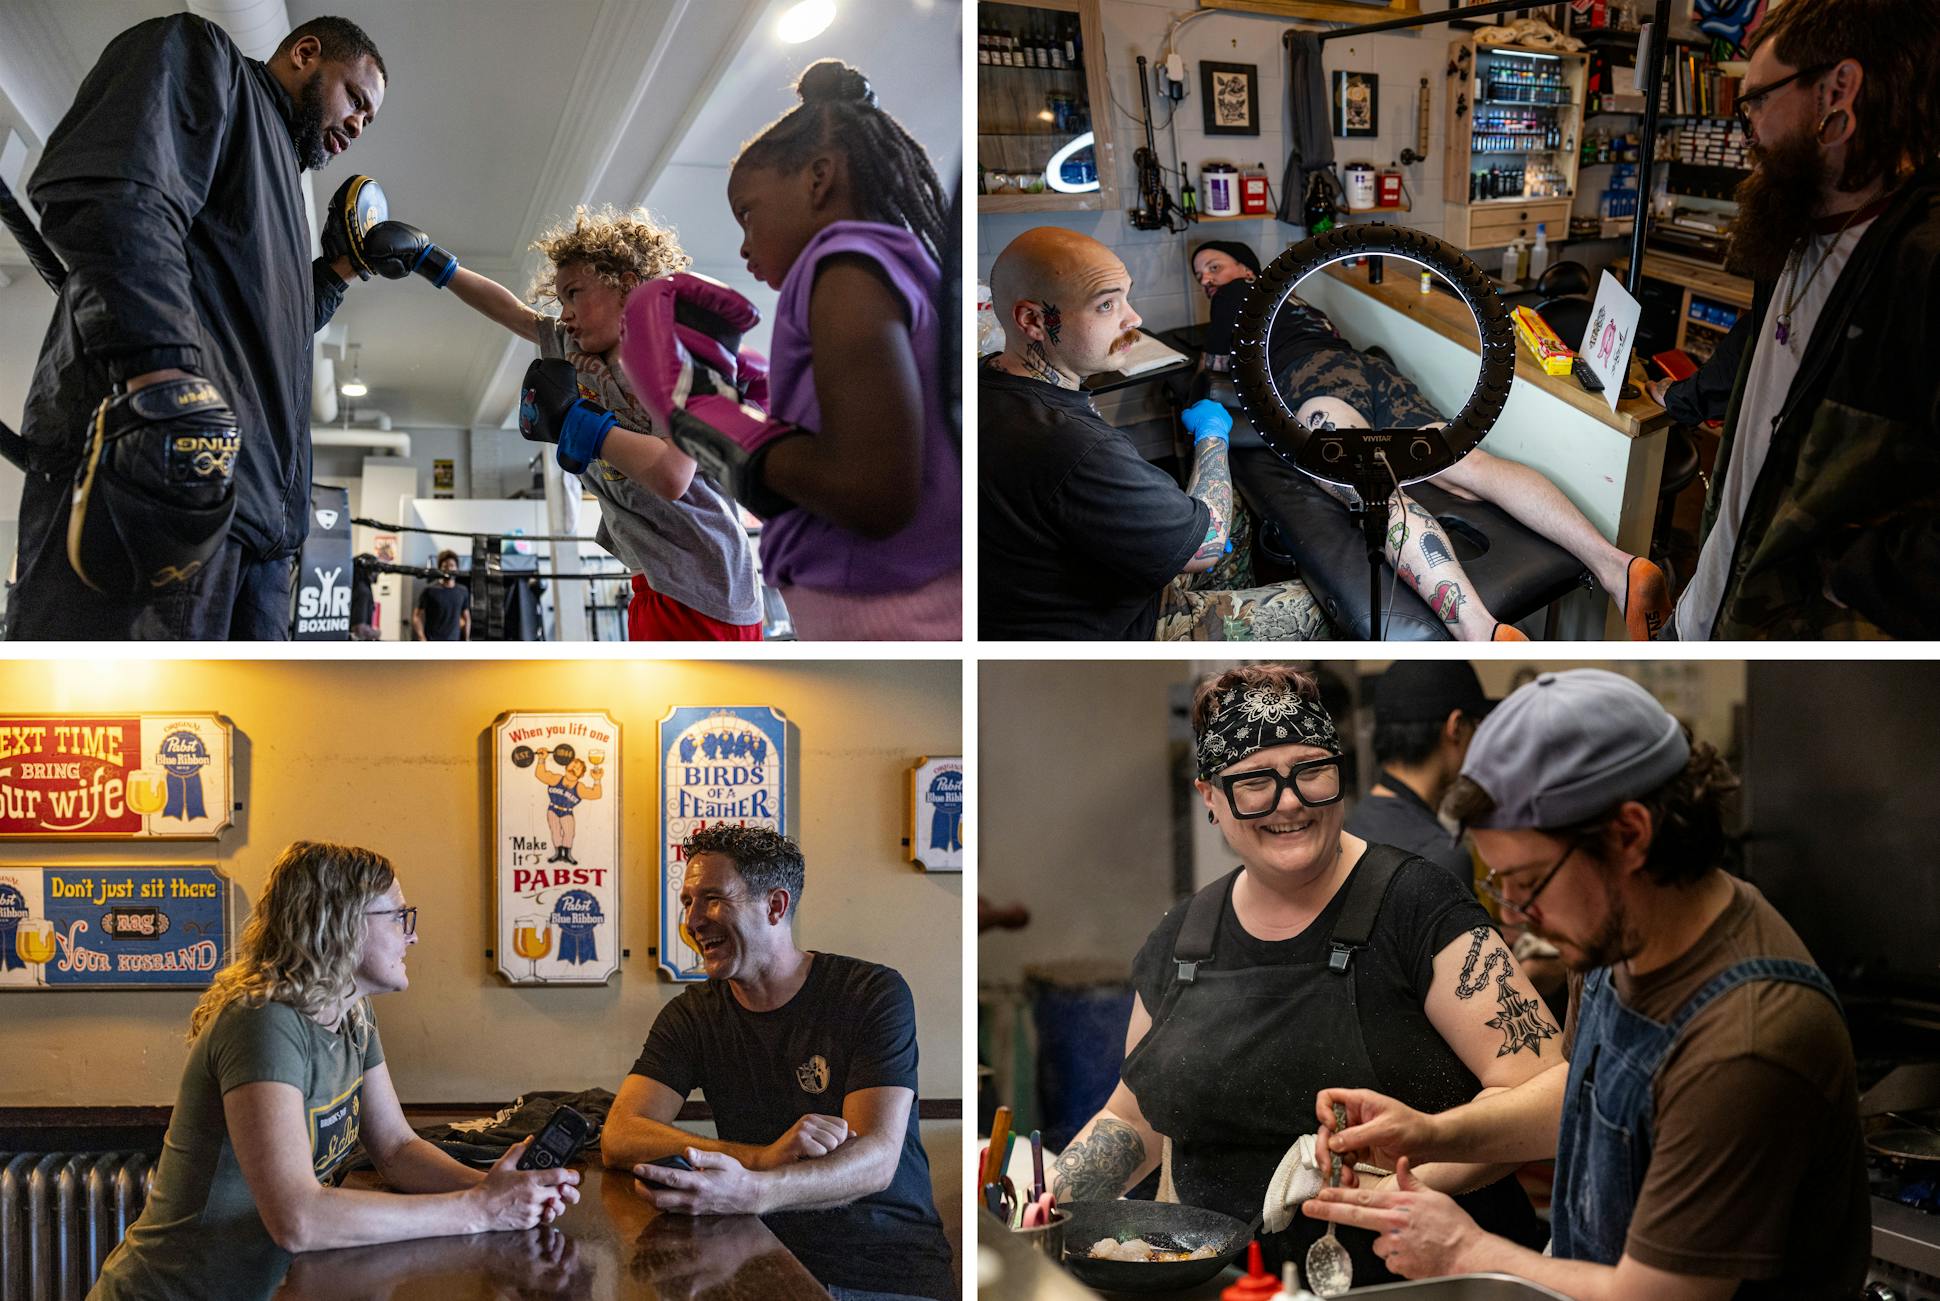 Top left: Sir Boxing Blub owner Cerresso Fort holds up a mitt for Quinn Ballew, 9, and Ta’Chell Hines, 7, in St. Paul on Wednesday, June 19.
Top right: Tattoo artist Jaeger Moosbrugger, left, of Port and Starboard Tattoo talks with owner Andy Rowe, far right, as customer and fellow tattoo artist Brandon Bjornson listens in St. Paul on Friday, June 21.
Bottom left: Brunson's Pub owners Molly and Thomas LaFleche hold a conversation in St. Paul on Wednesday, June 19. The couple have owned the pub for several years. 
Bottom right: Tongue in Cheek line chefs Emily Brooks, left, and Colby Swanson work together in the restaurant's kitchen in St. Paul on Friday, June 21.

